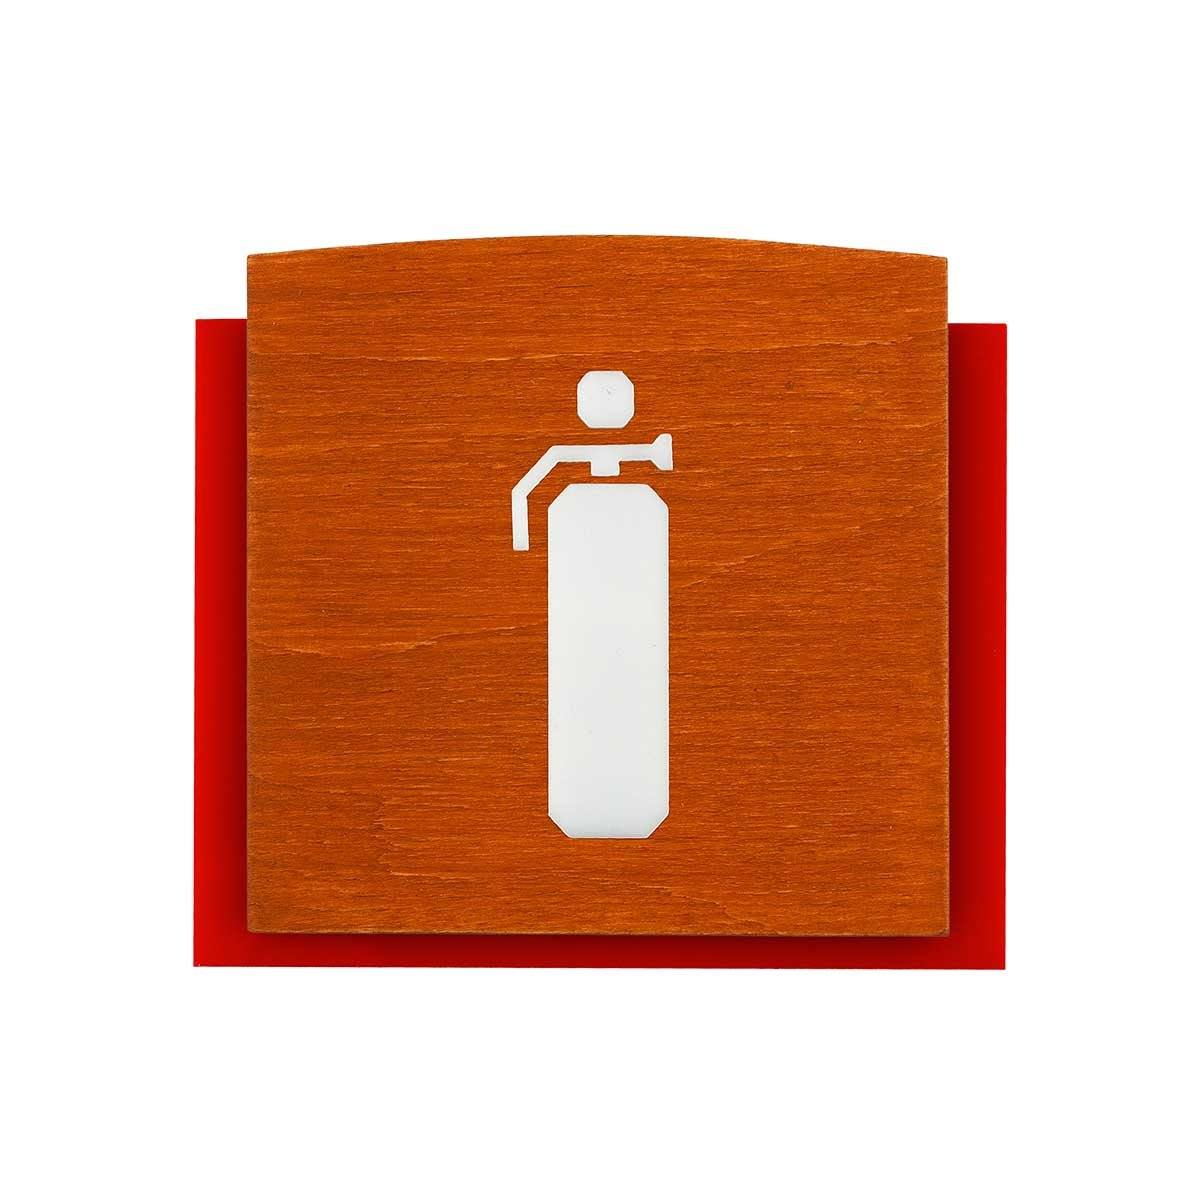 Wood Extinguisher Fire Safety Sign for Office Information signs Walhunt Bsign